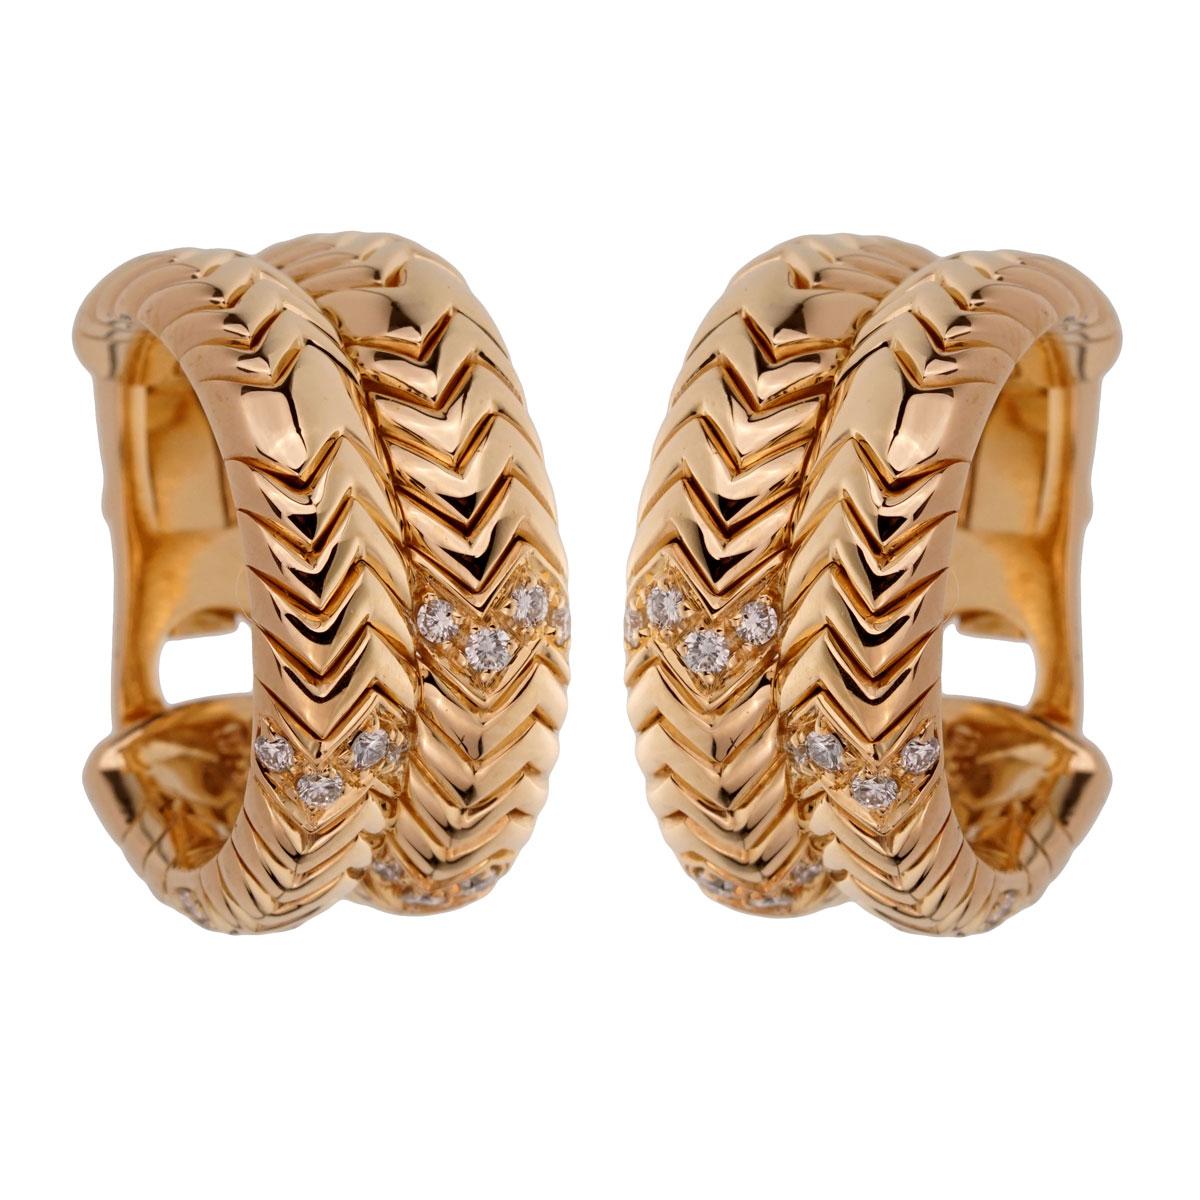 An iconic set of authentic Bulgari Spiga earrings adorned with round brilliant cut diamonds in shimmering 18k yellow gold.